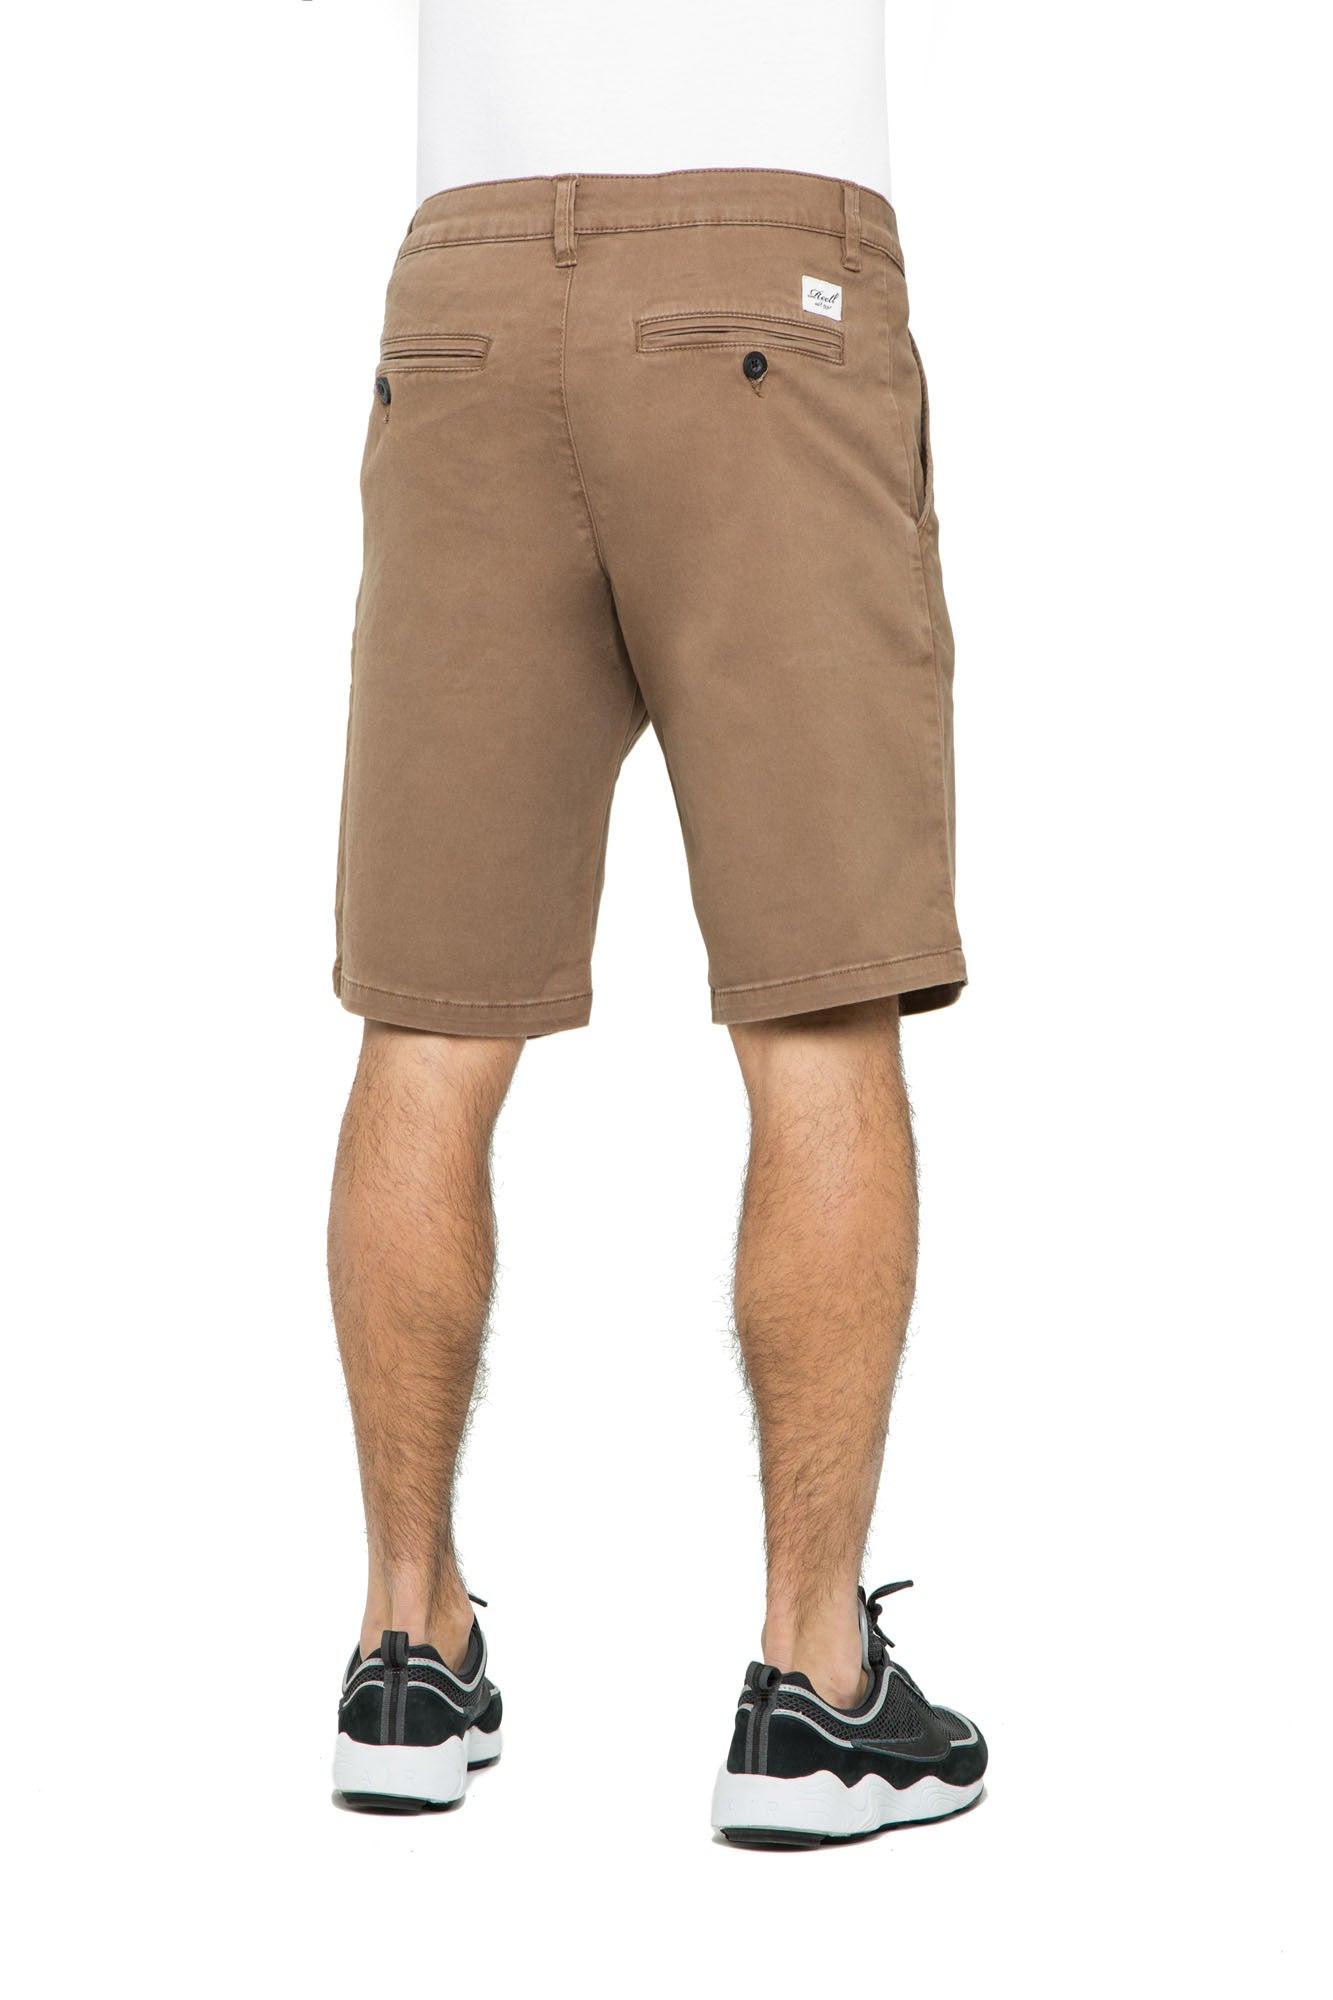 REEL FLEX GRIP CHINO SHORT - OCRE BROWN freeshipping - FREESTYLE LLORET